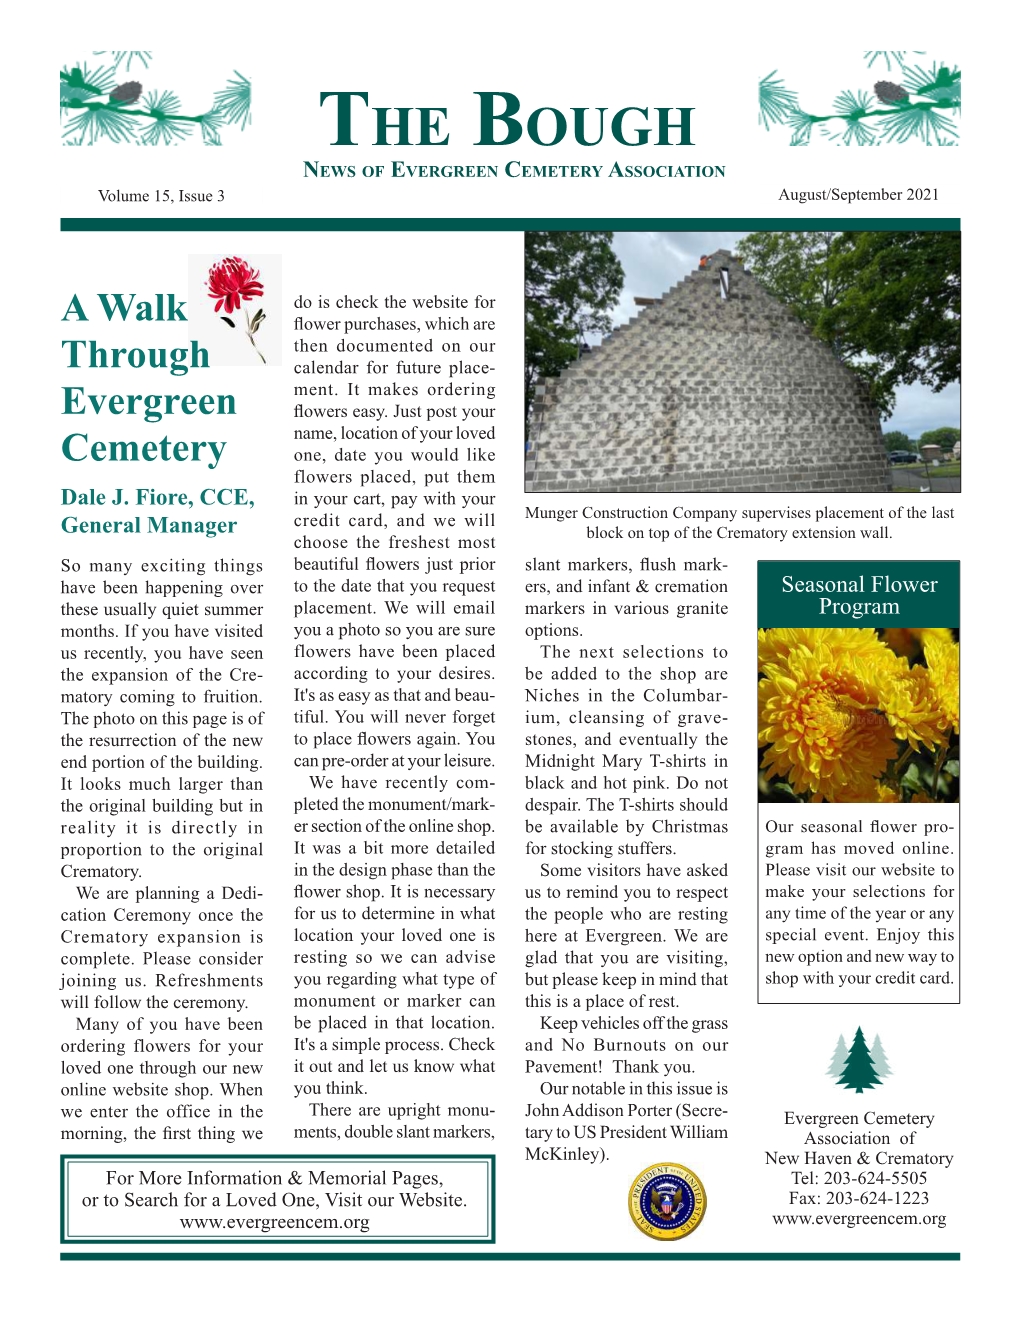 The Bough News of Evergreen Cemetery Association Volume 15, Issue 3 August/September 2021